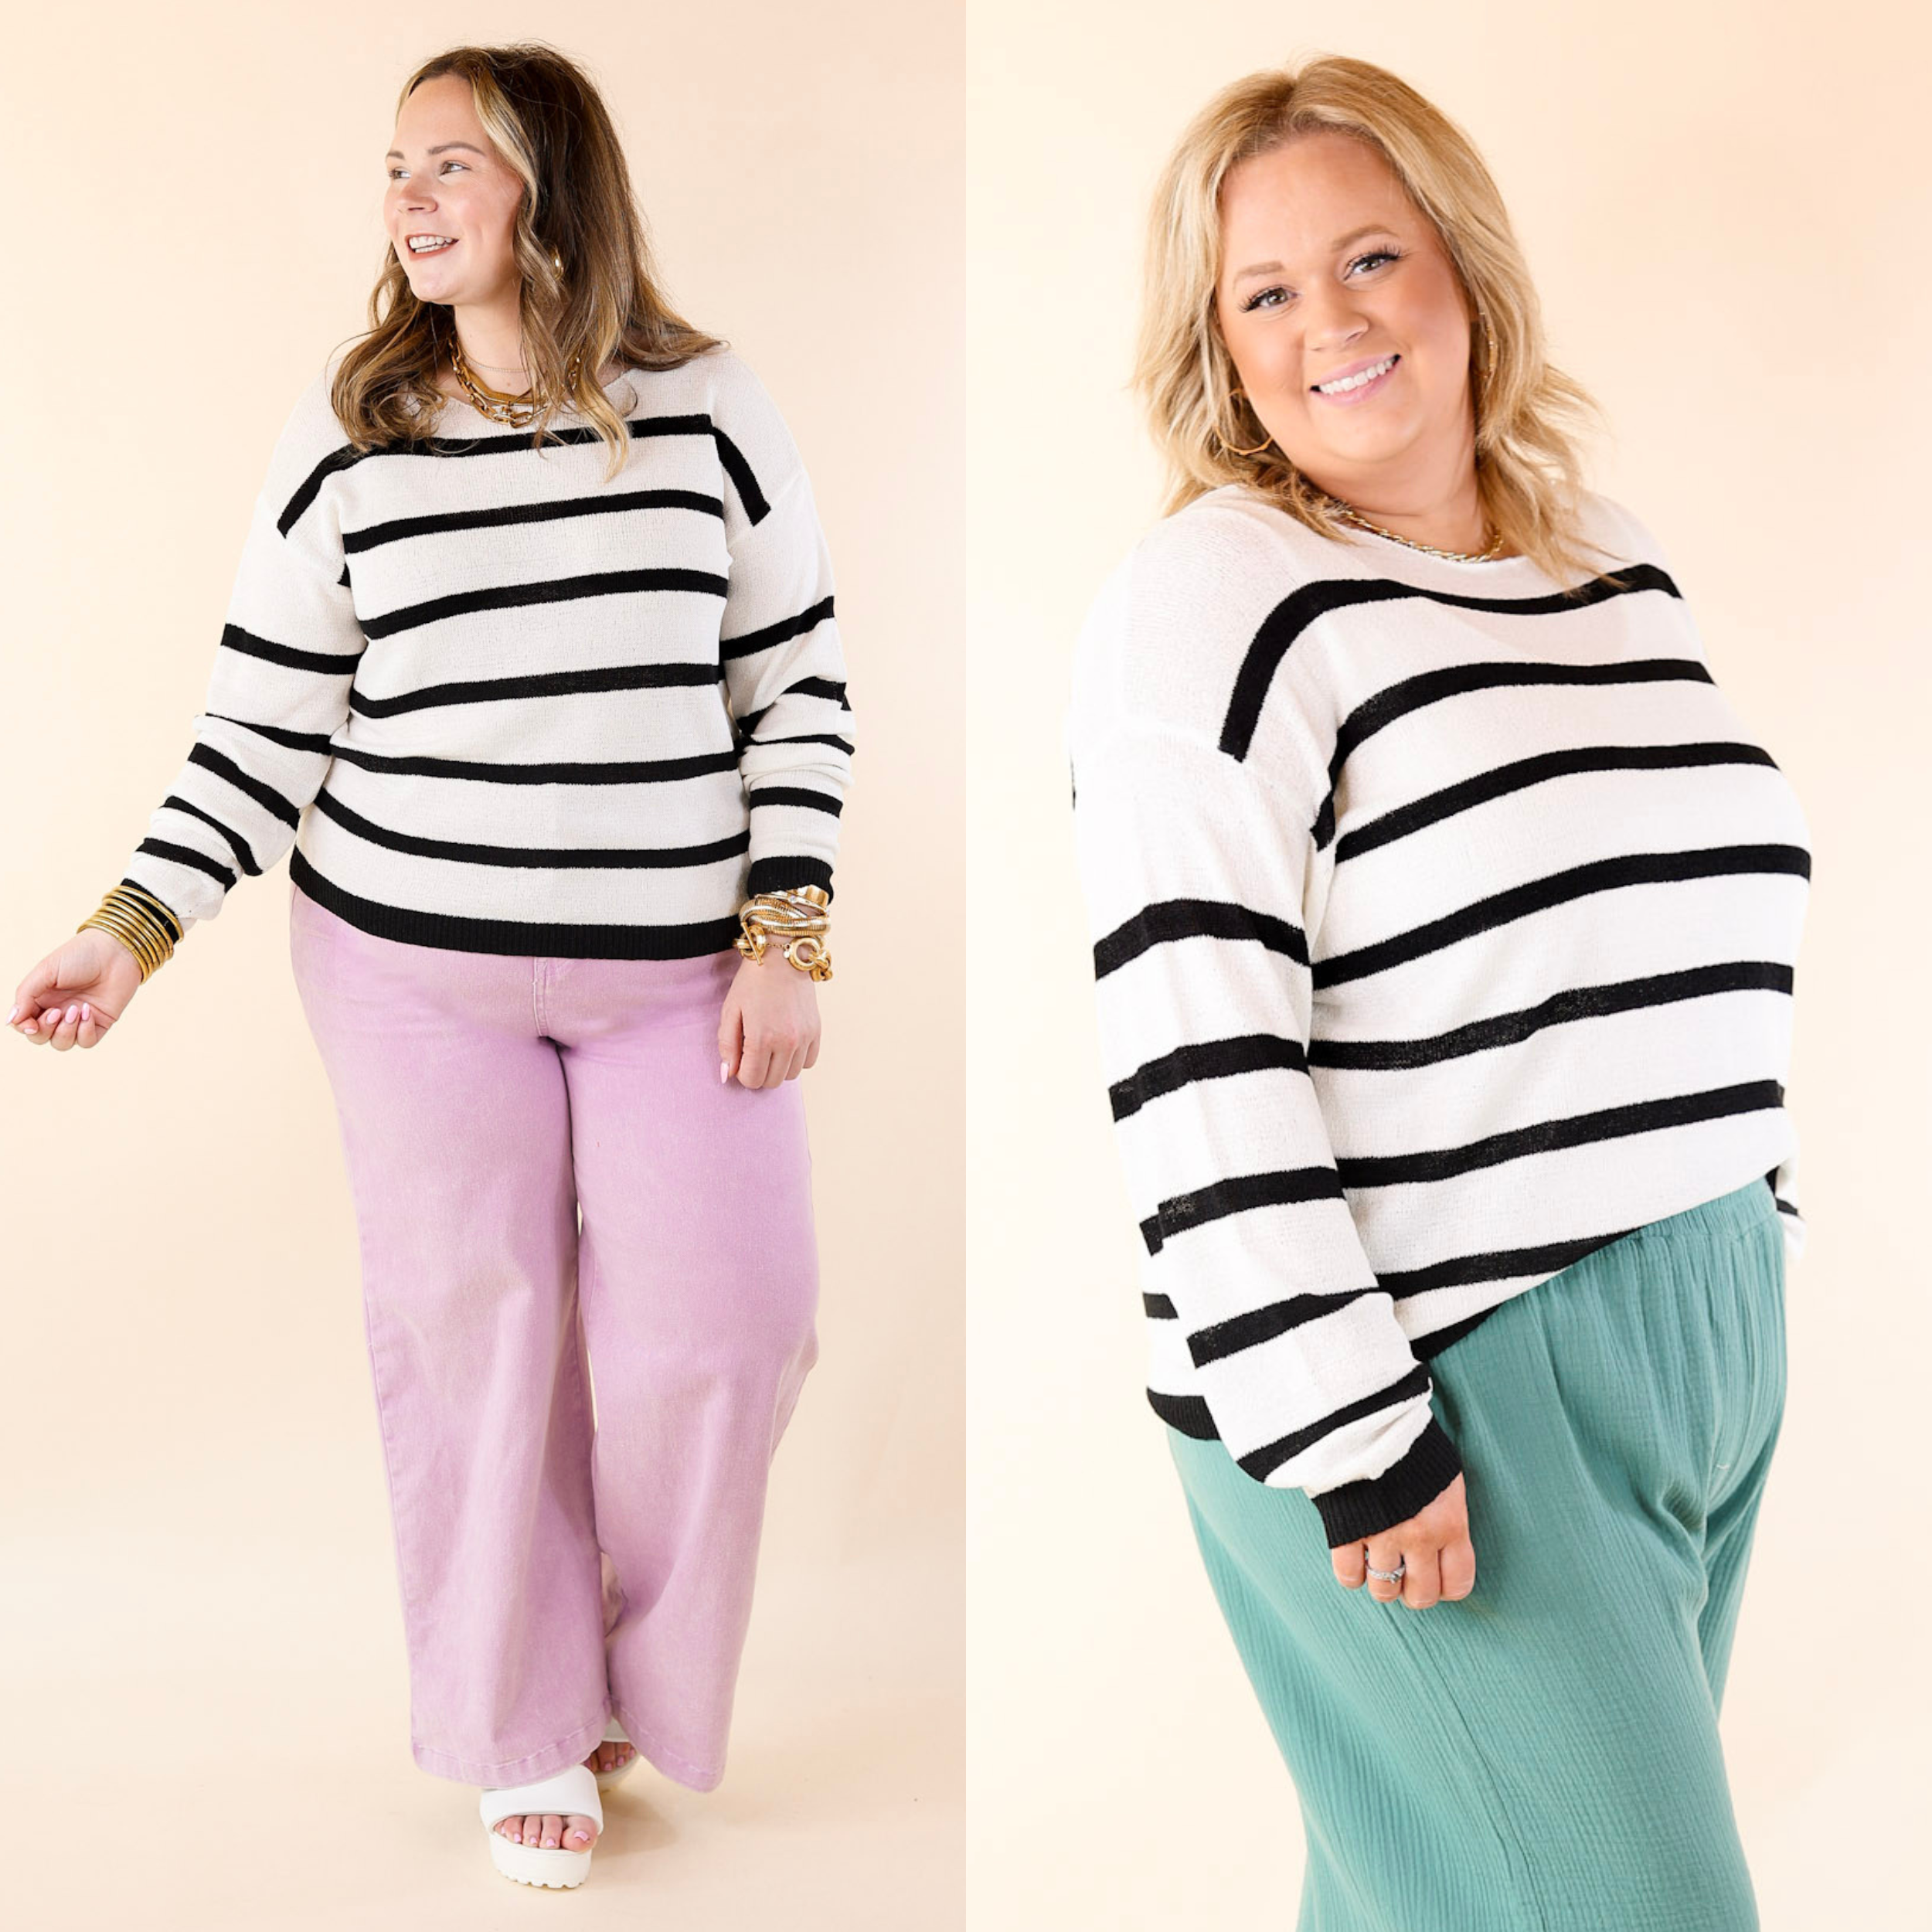 Let's Hang Out Striped Long Sleeve Top in Black and White - Giddy Up Glamour Boutique